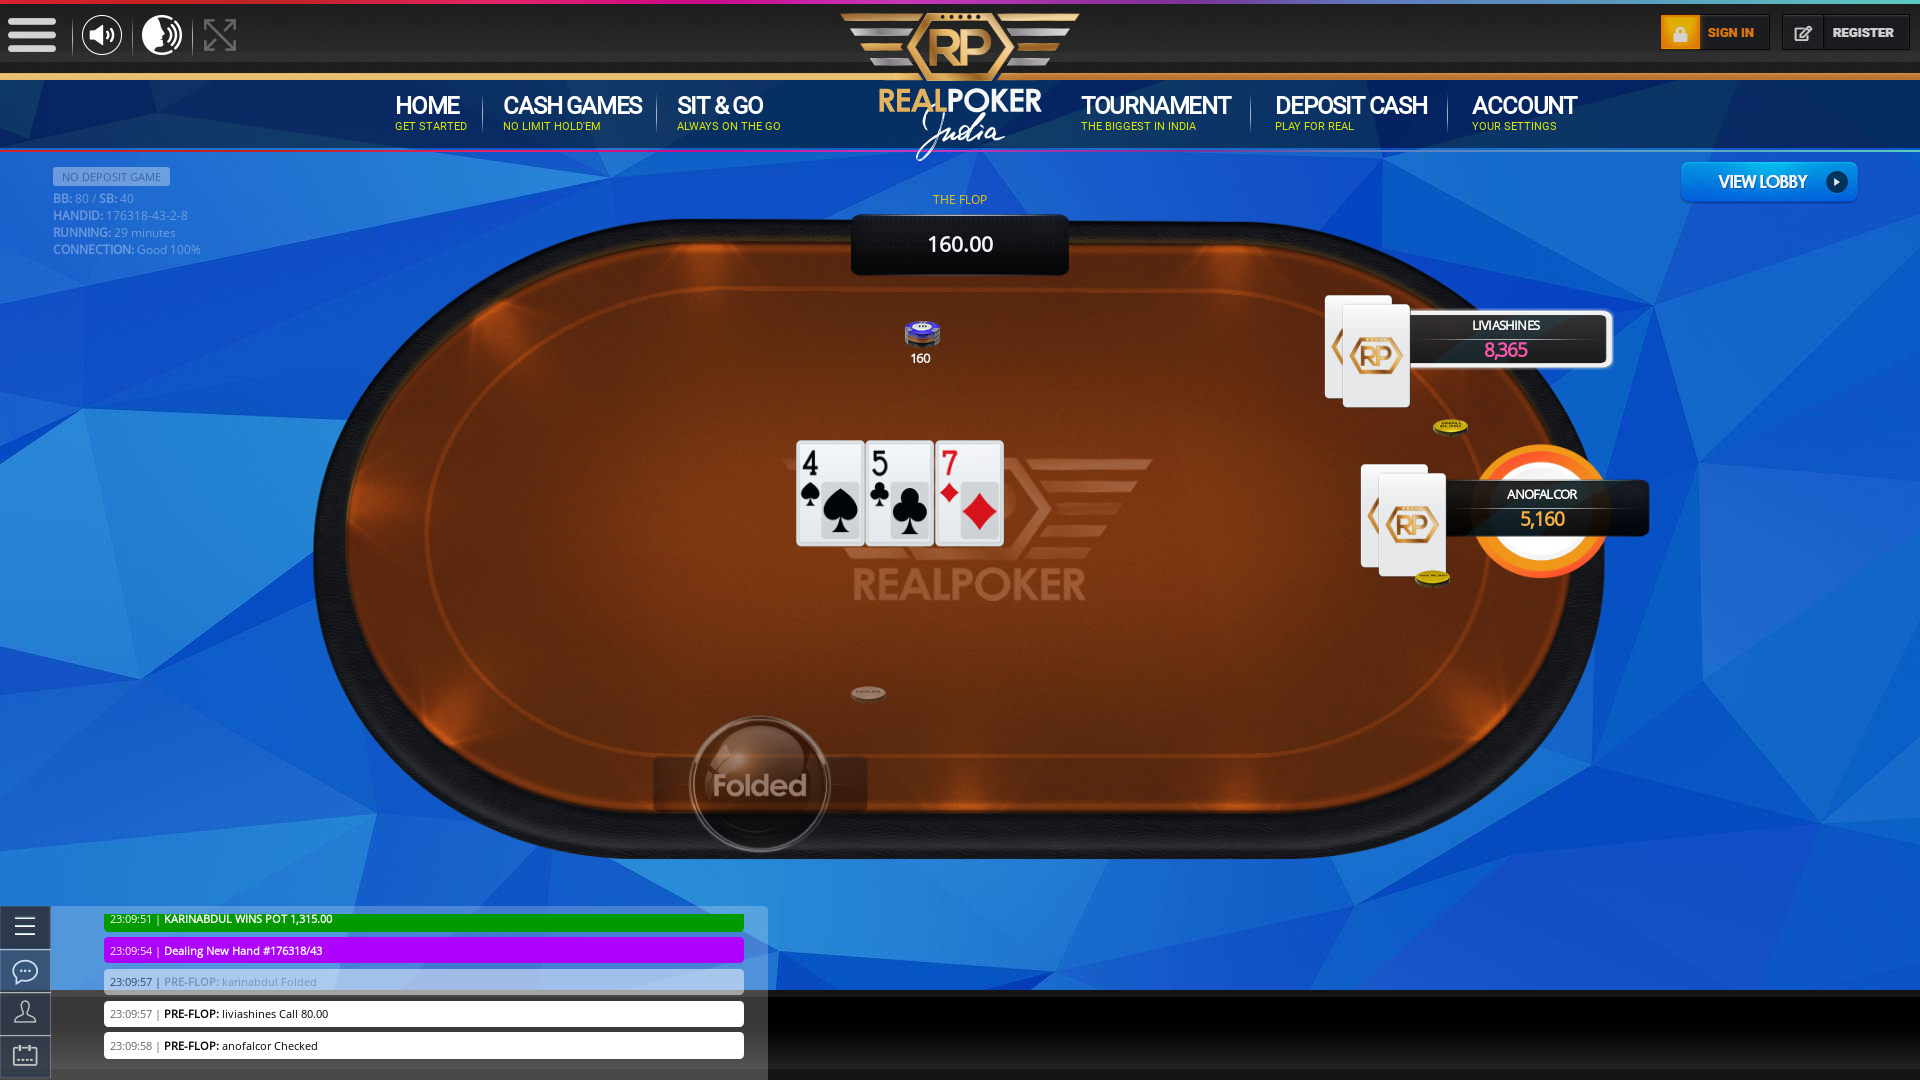 Real Indian poker on a 10 player table in the 28th minute of the game